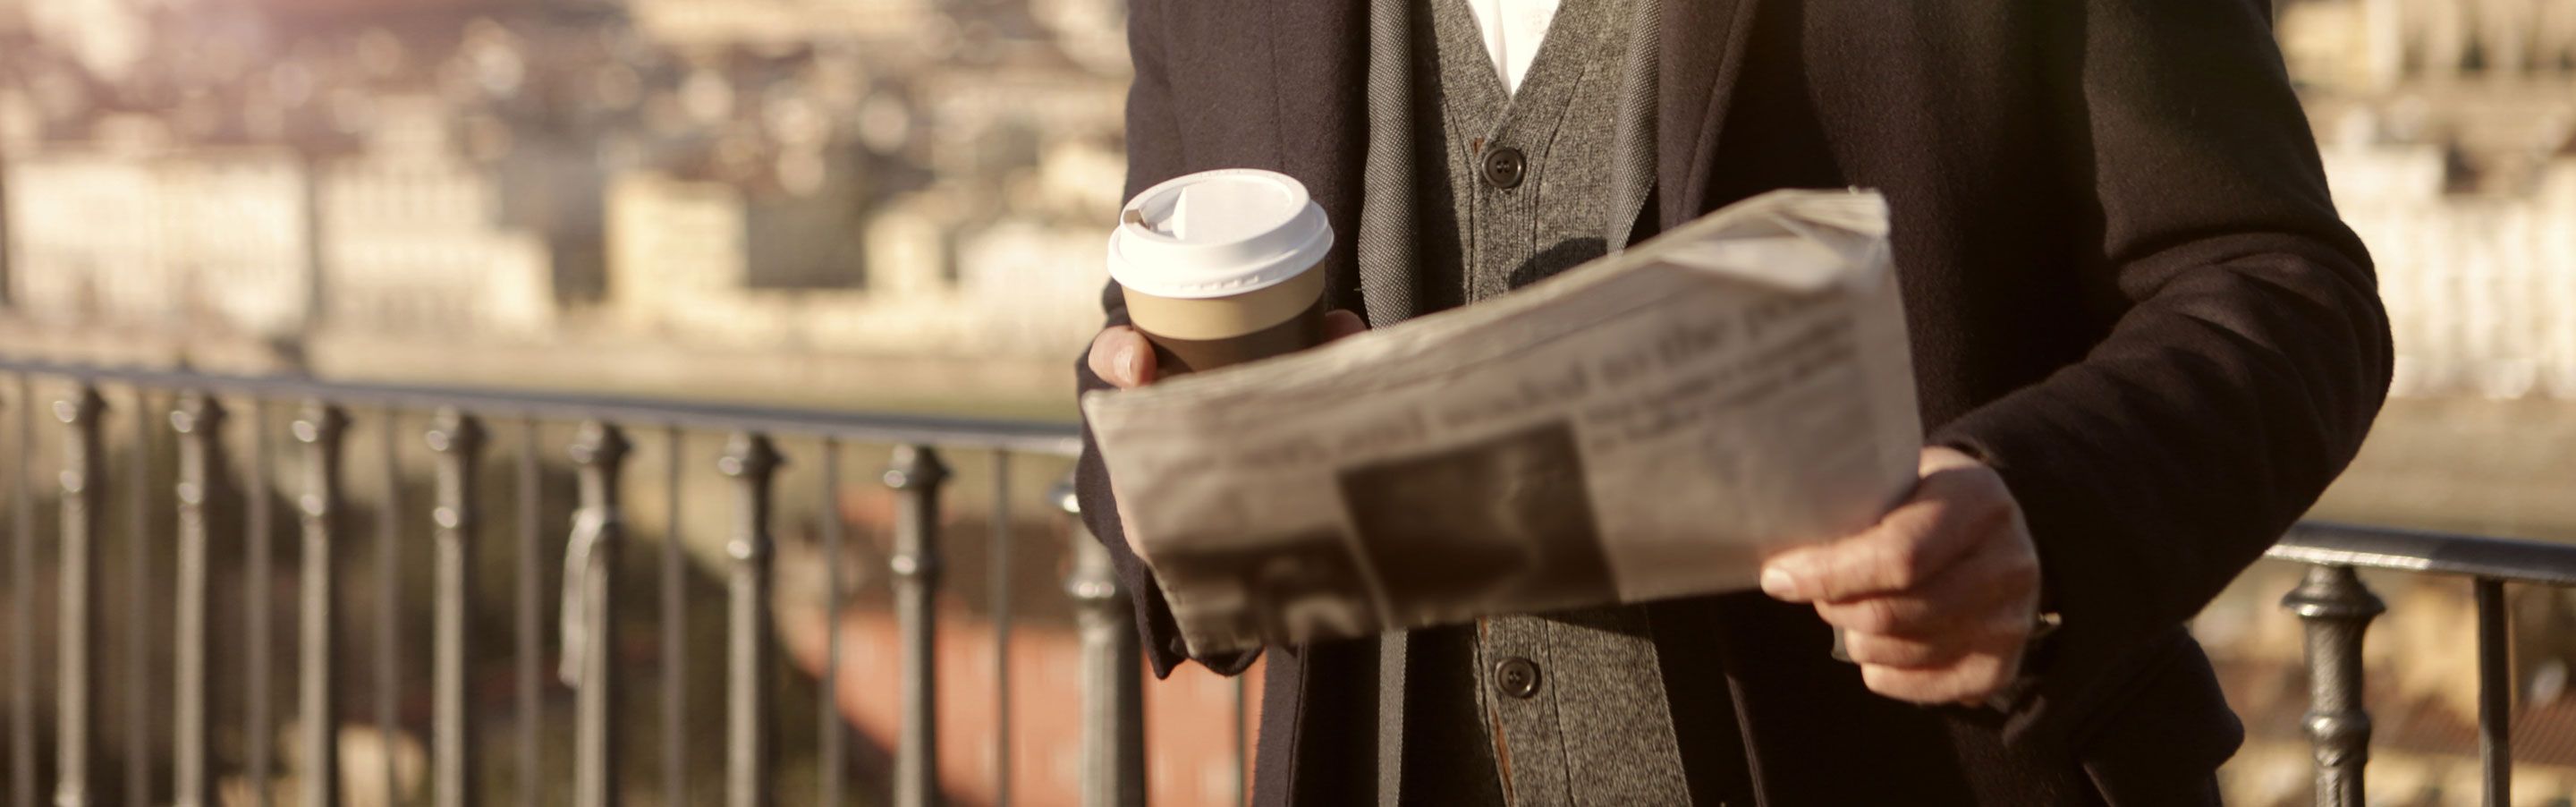 Journalist holding coffee and newsletter